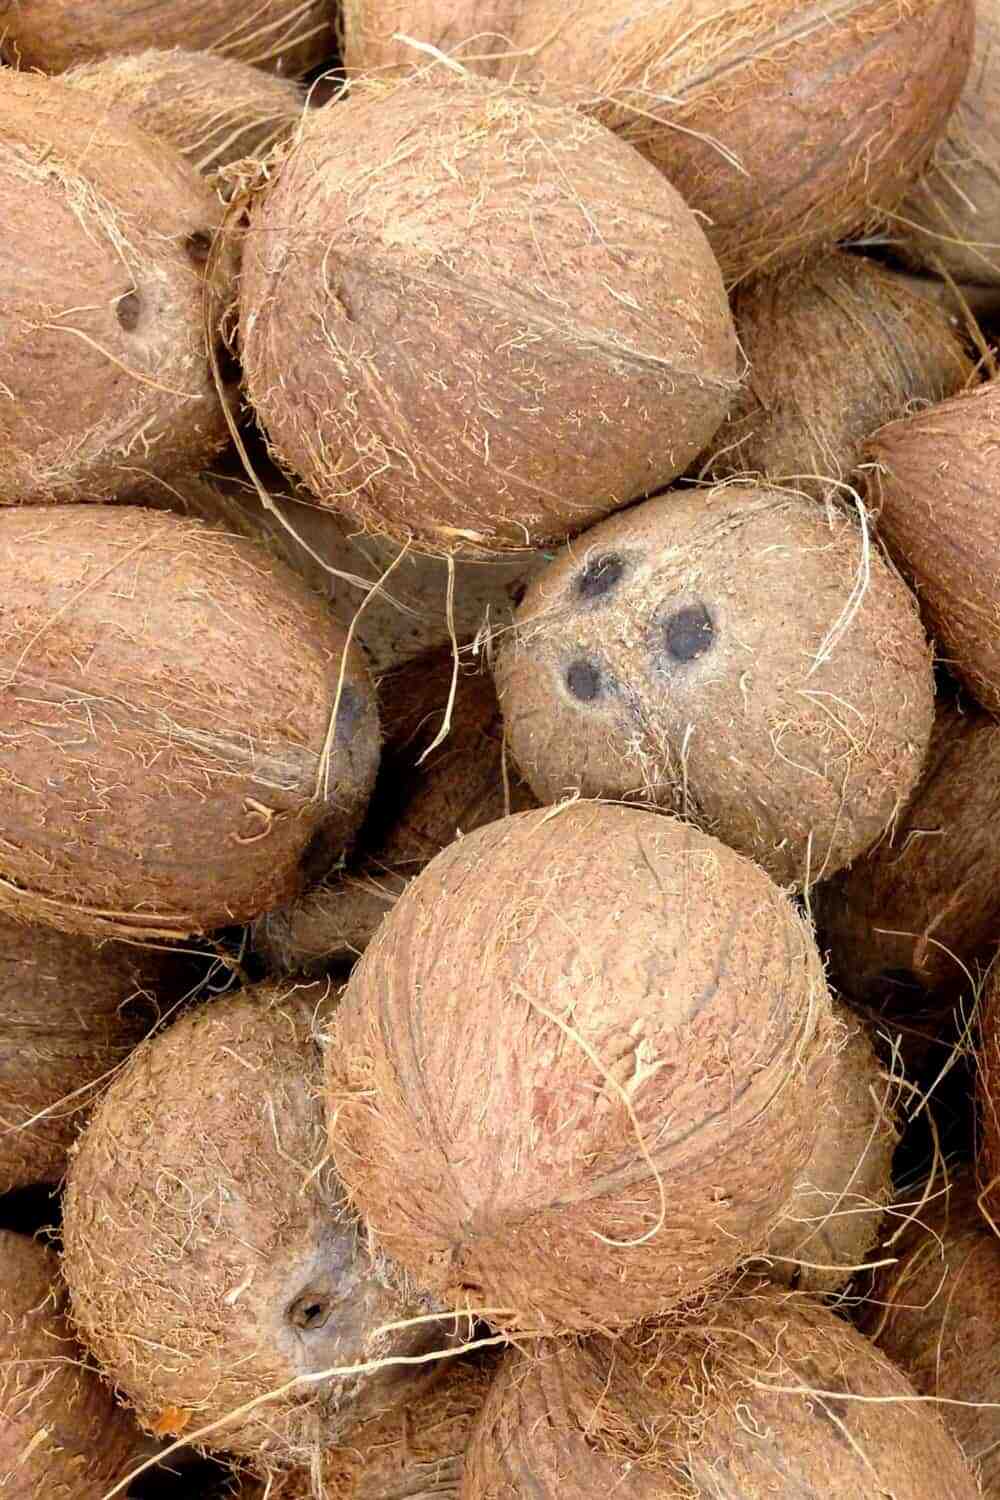 How long does a coconut last?